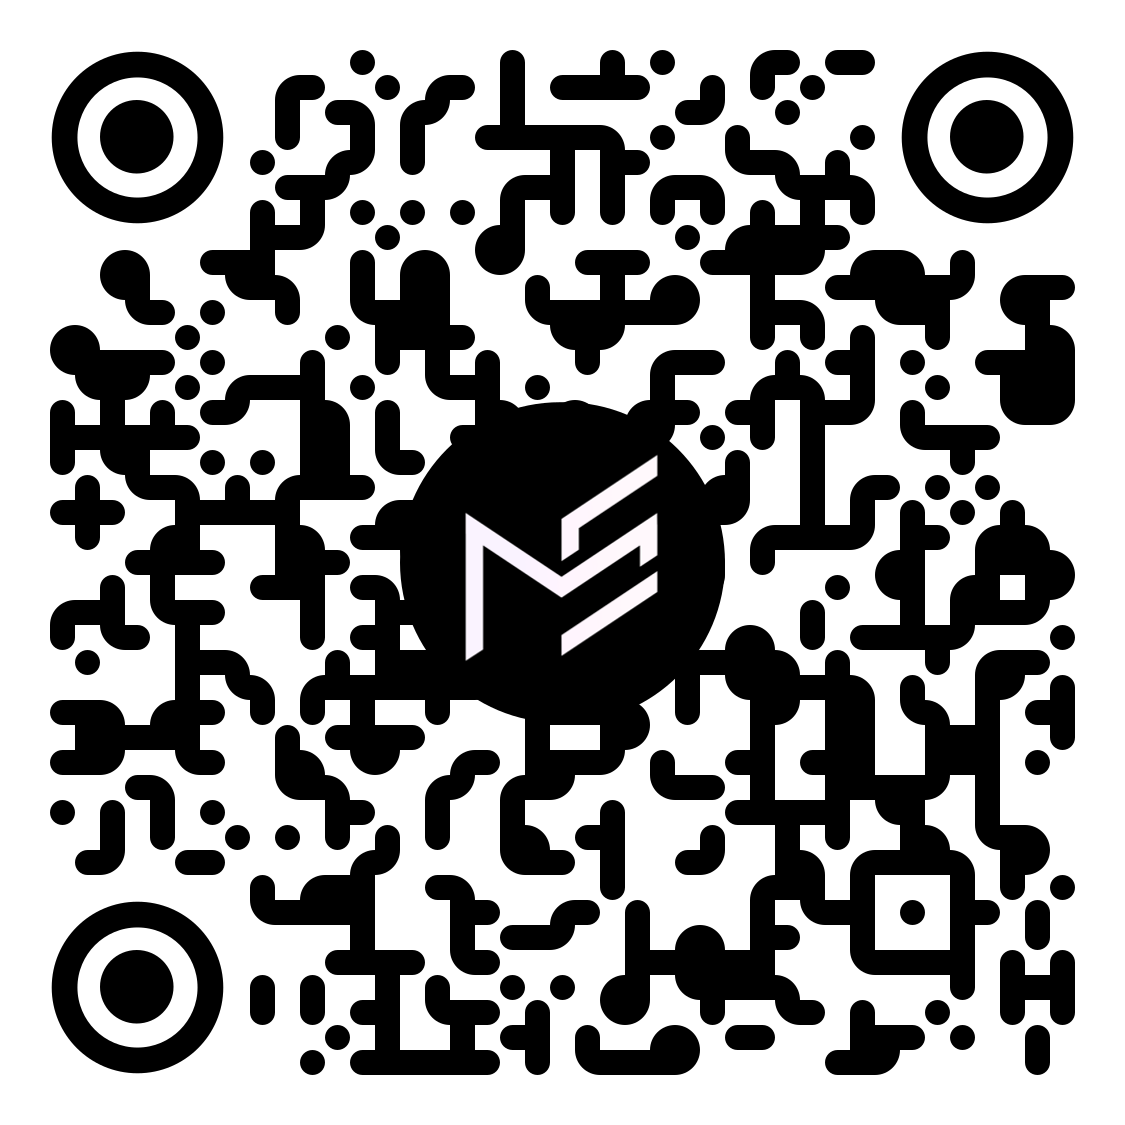 QR code on the card. Expands when clicked